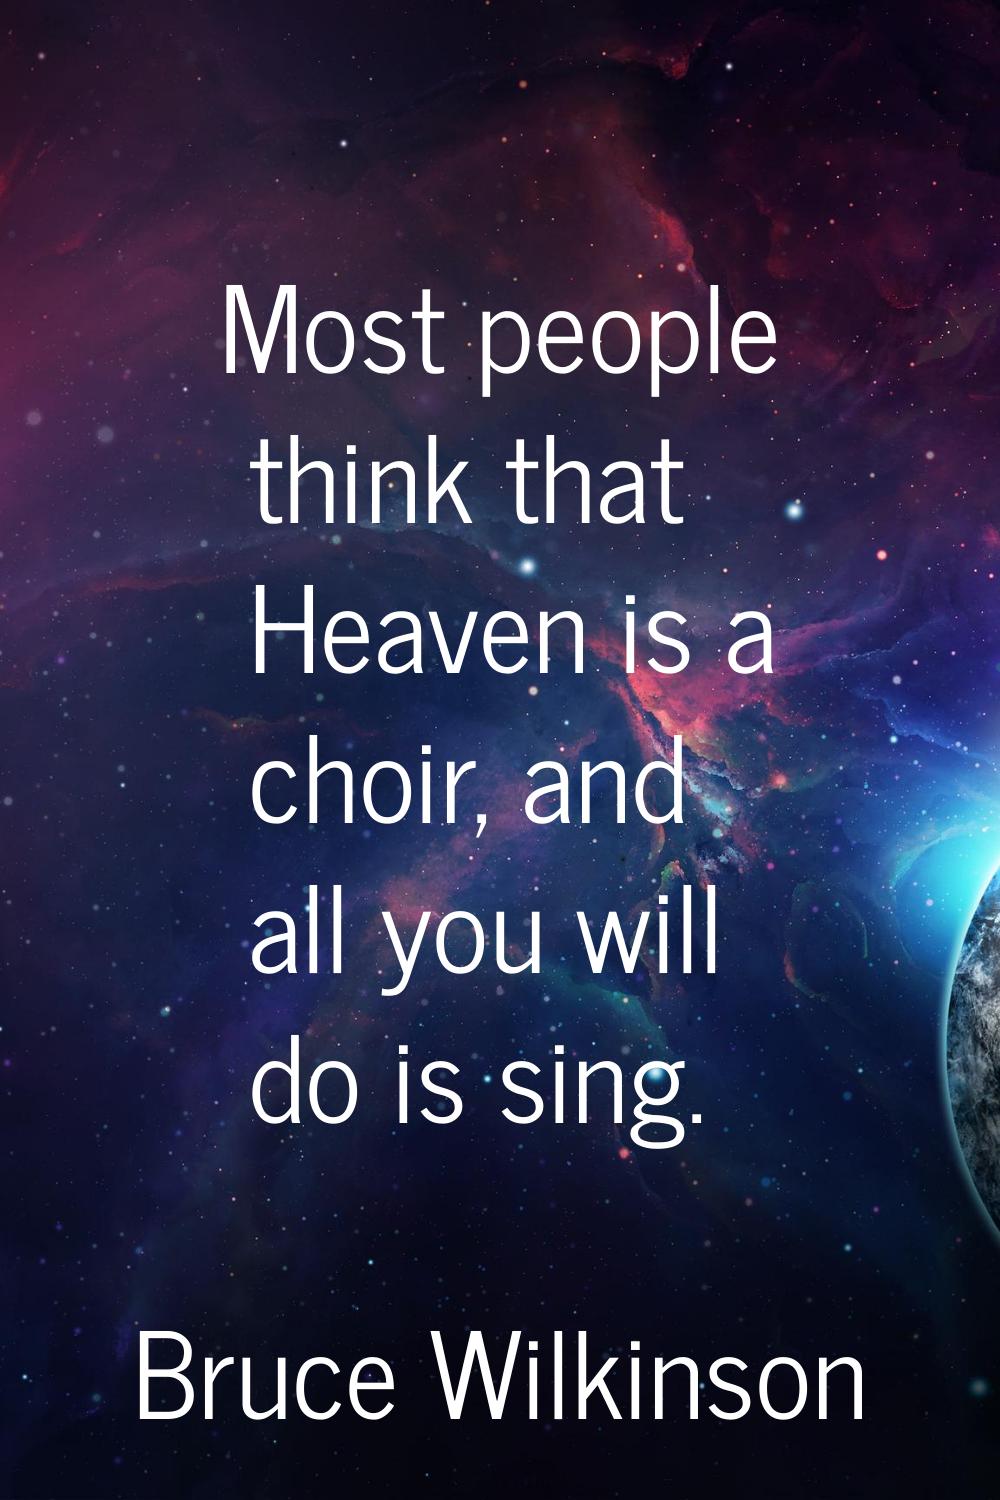 Most people think that Heaven is a choir, and all you will do is sing.